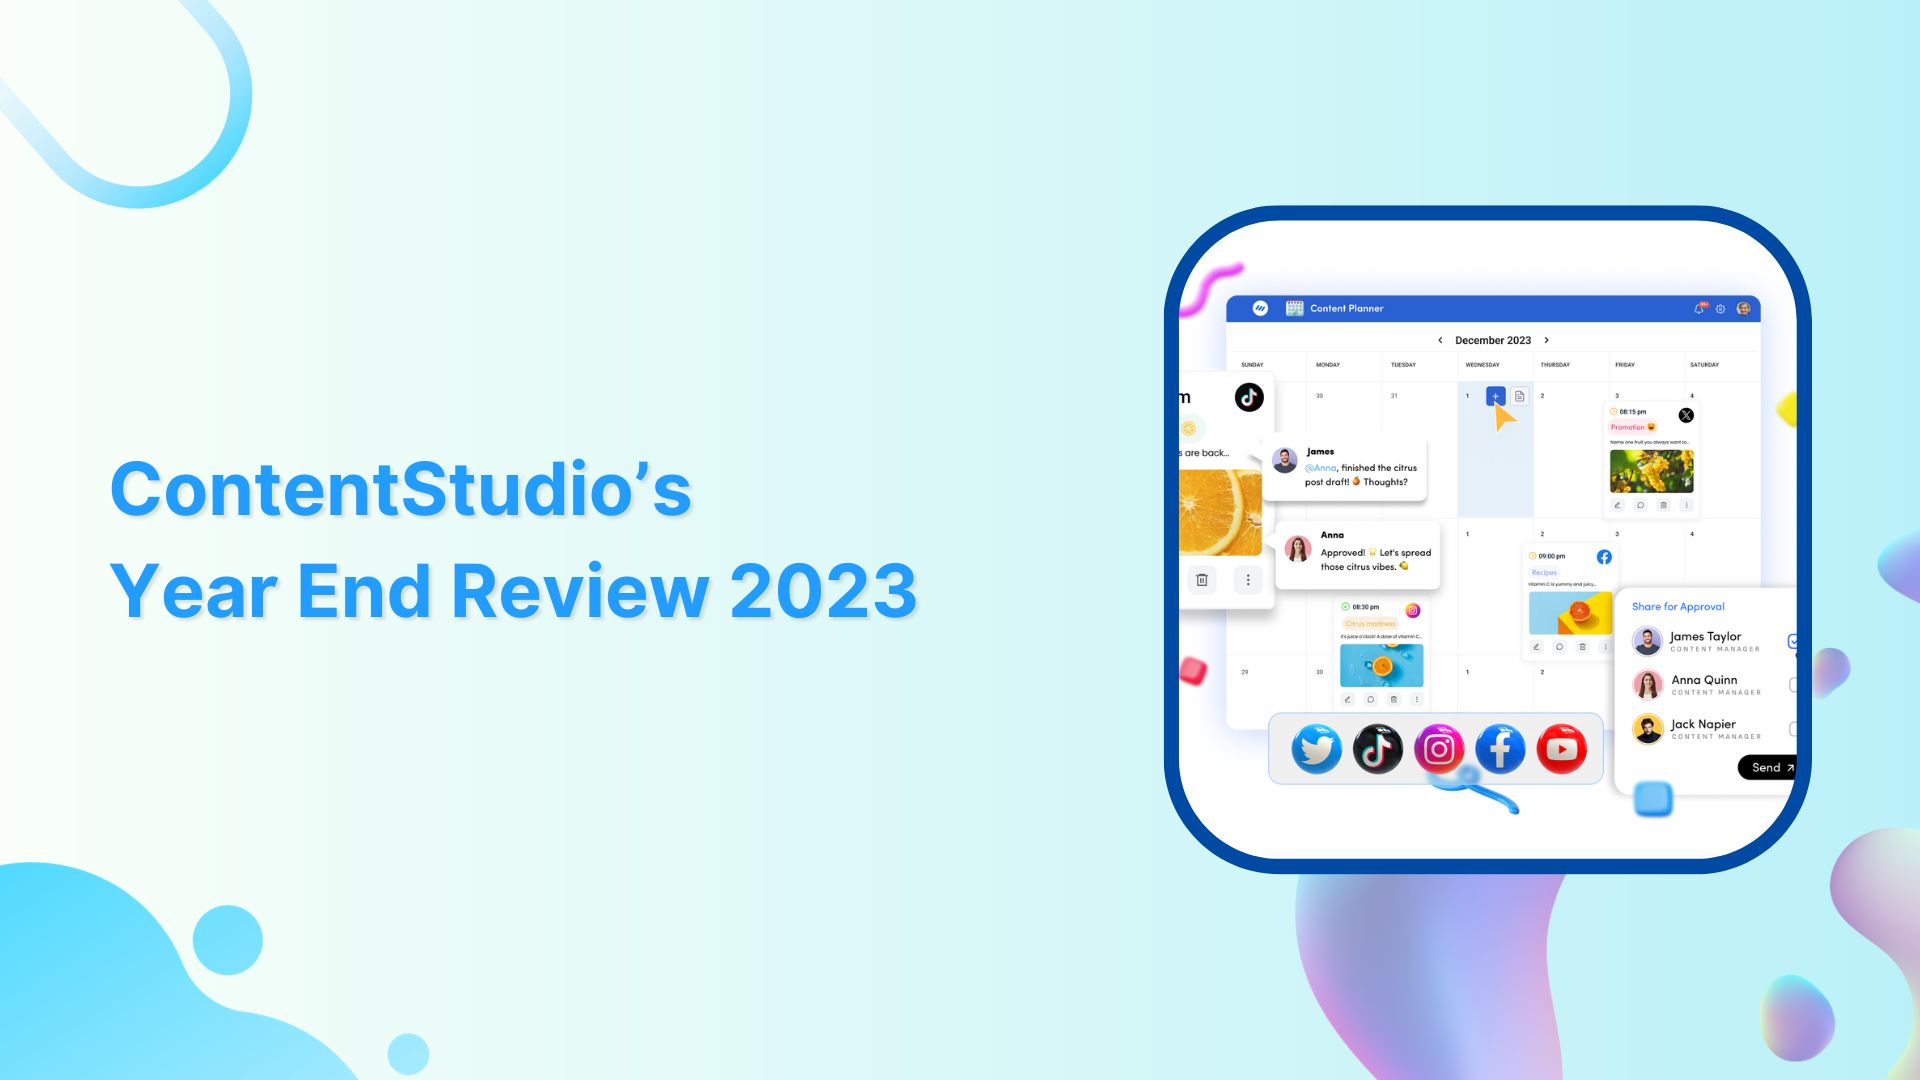 ContentStudio's year end review 2023